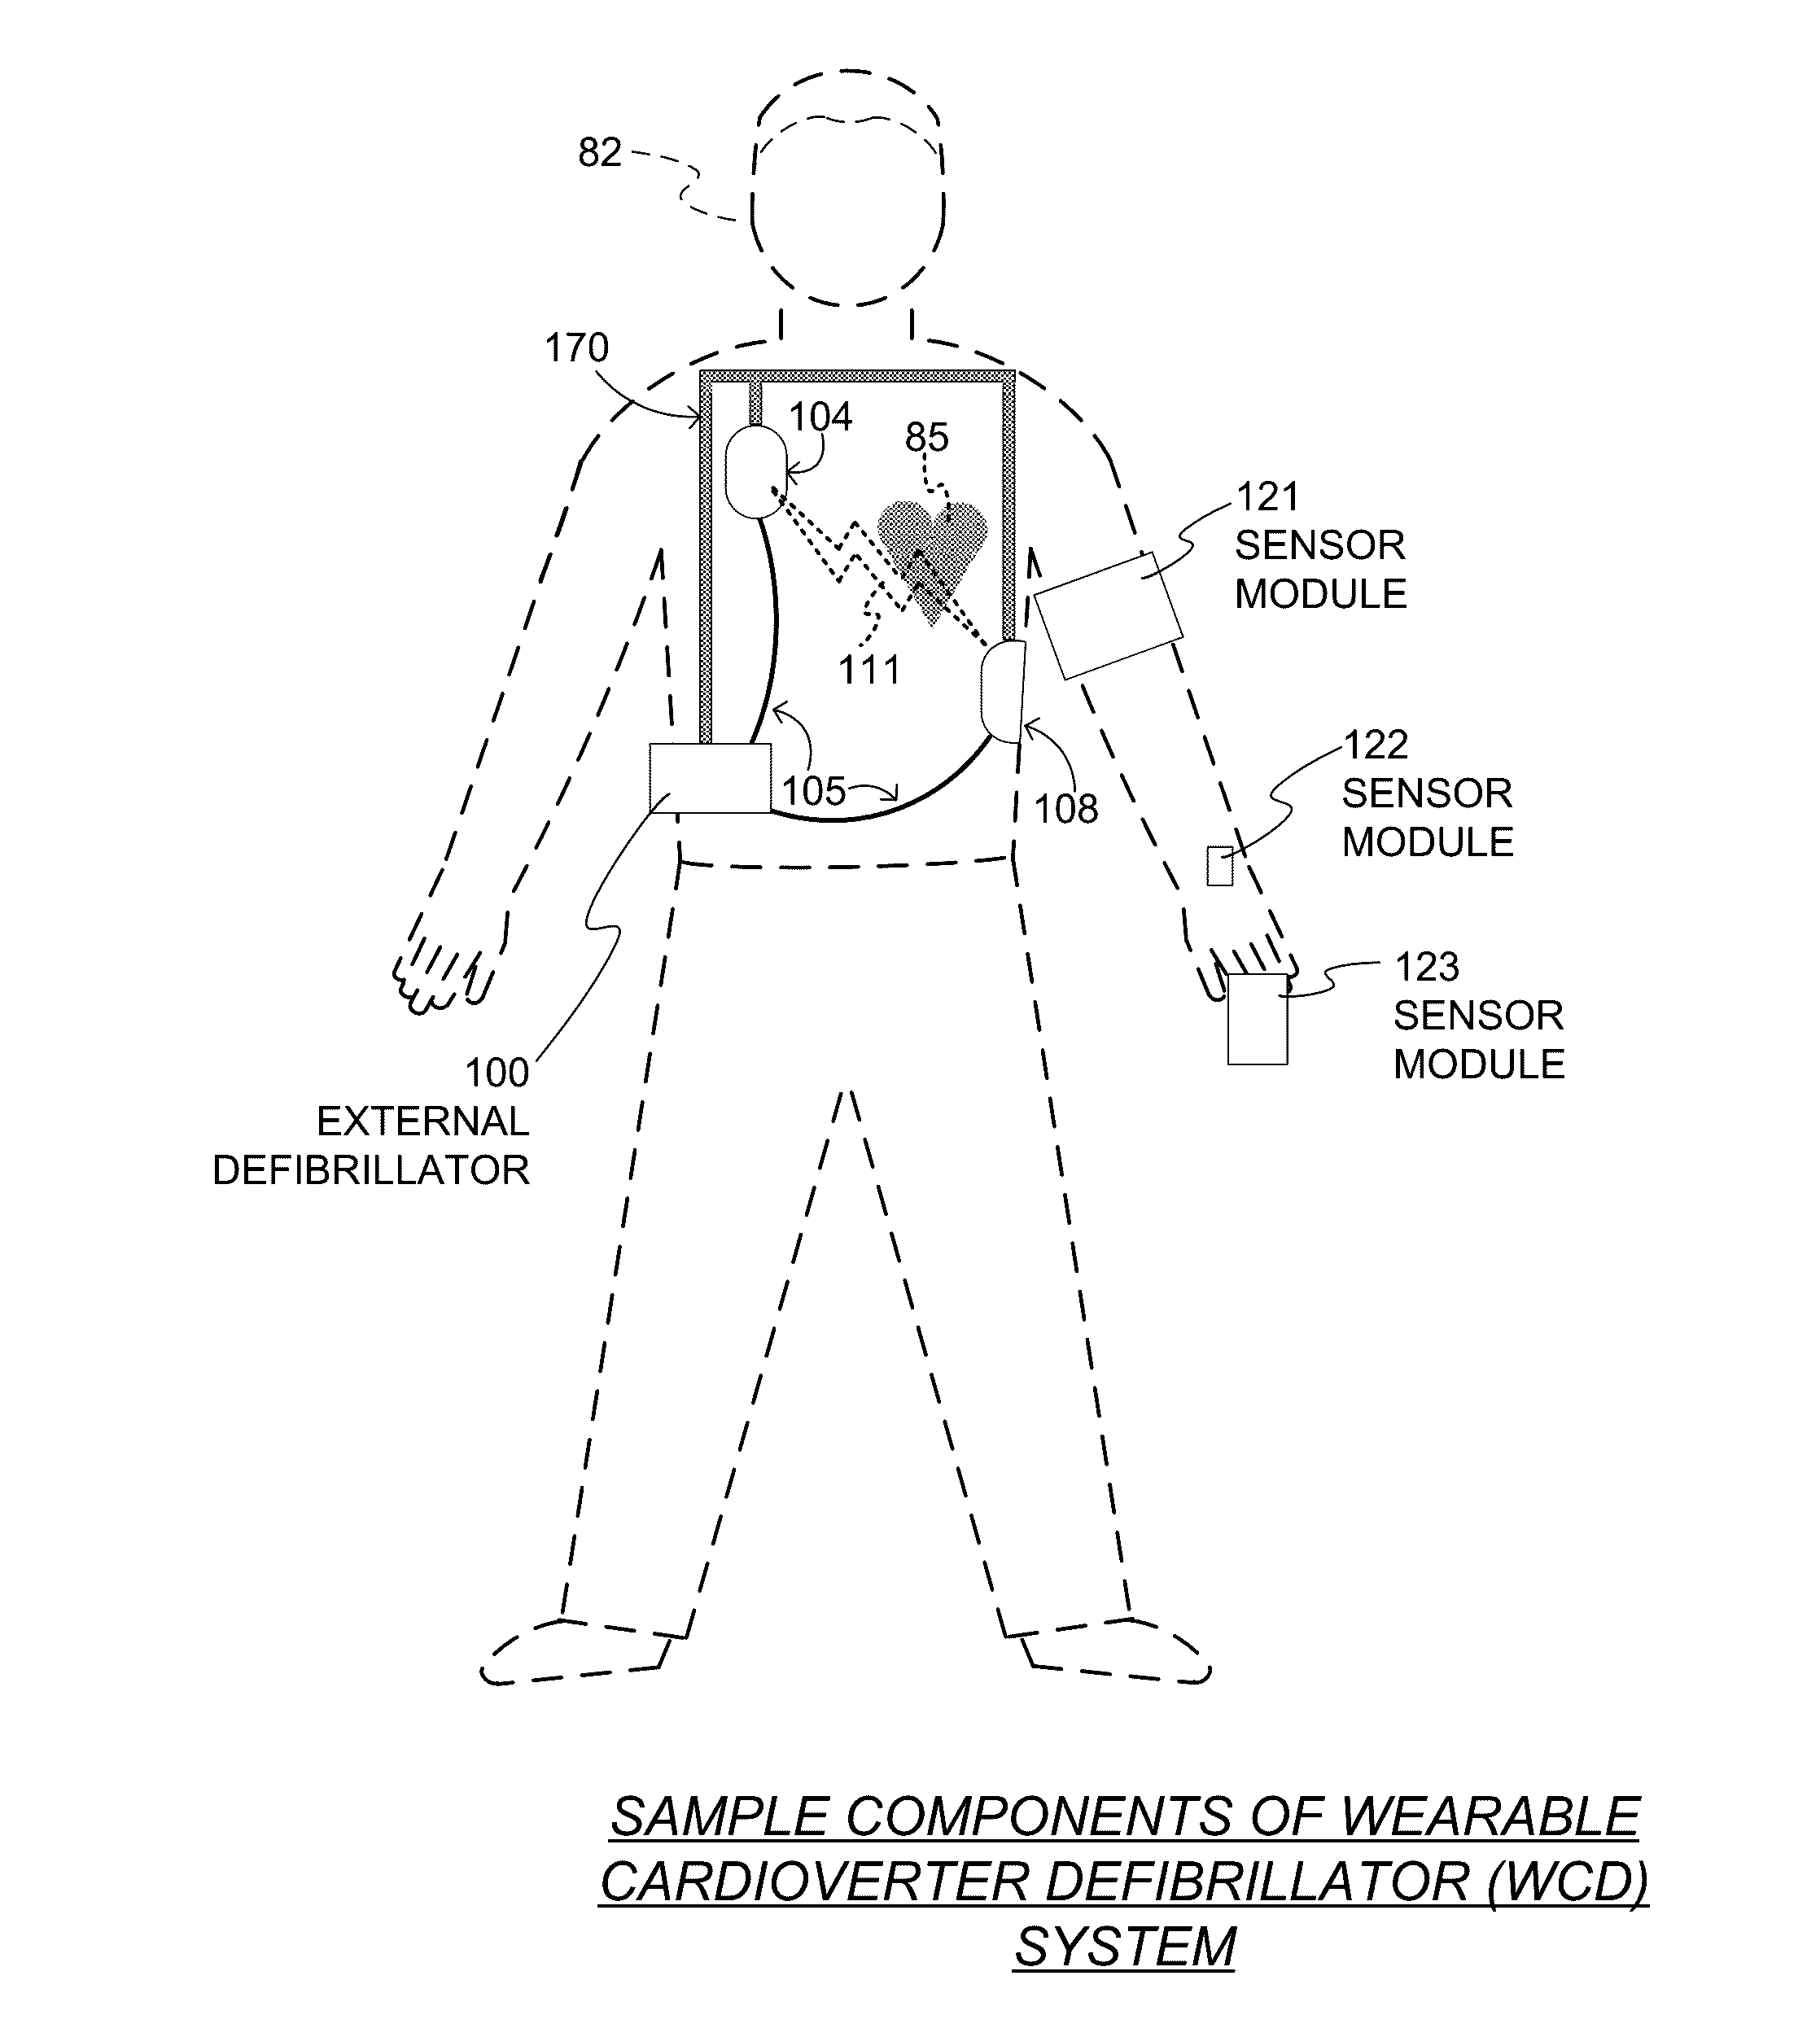 Wearable cardioverter defibrillator (WCD) system using sensor modules for confirmation before shock